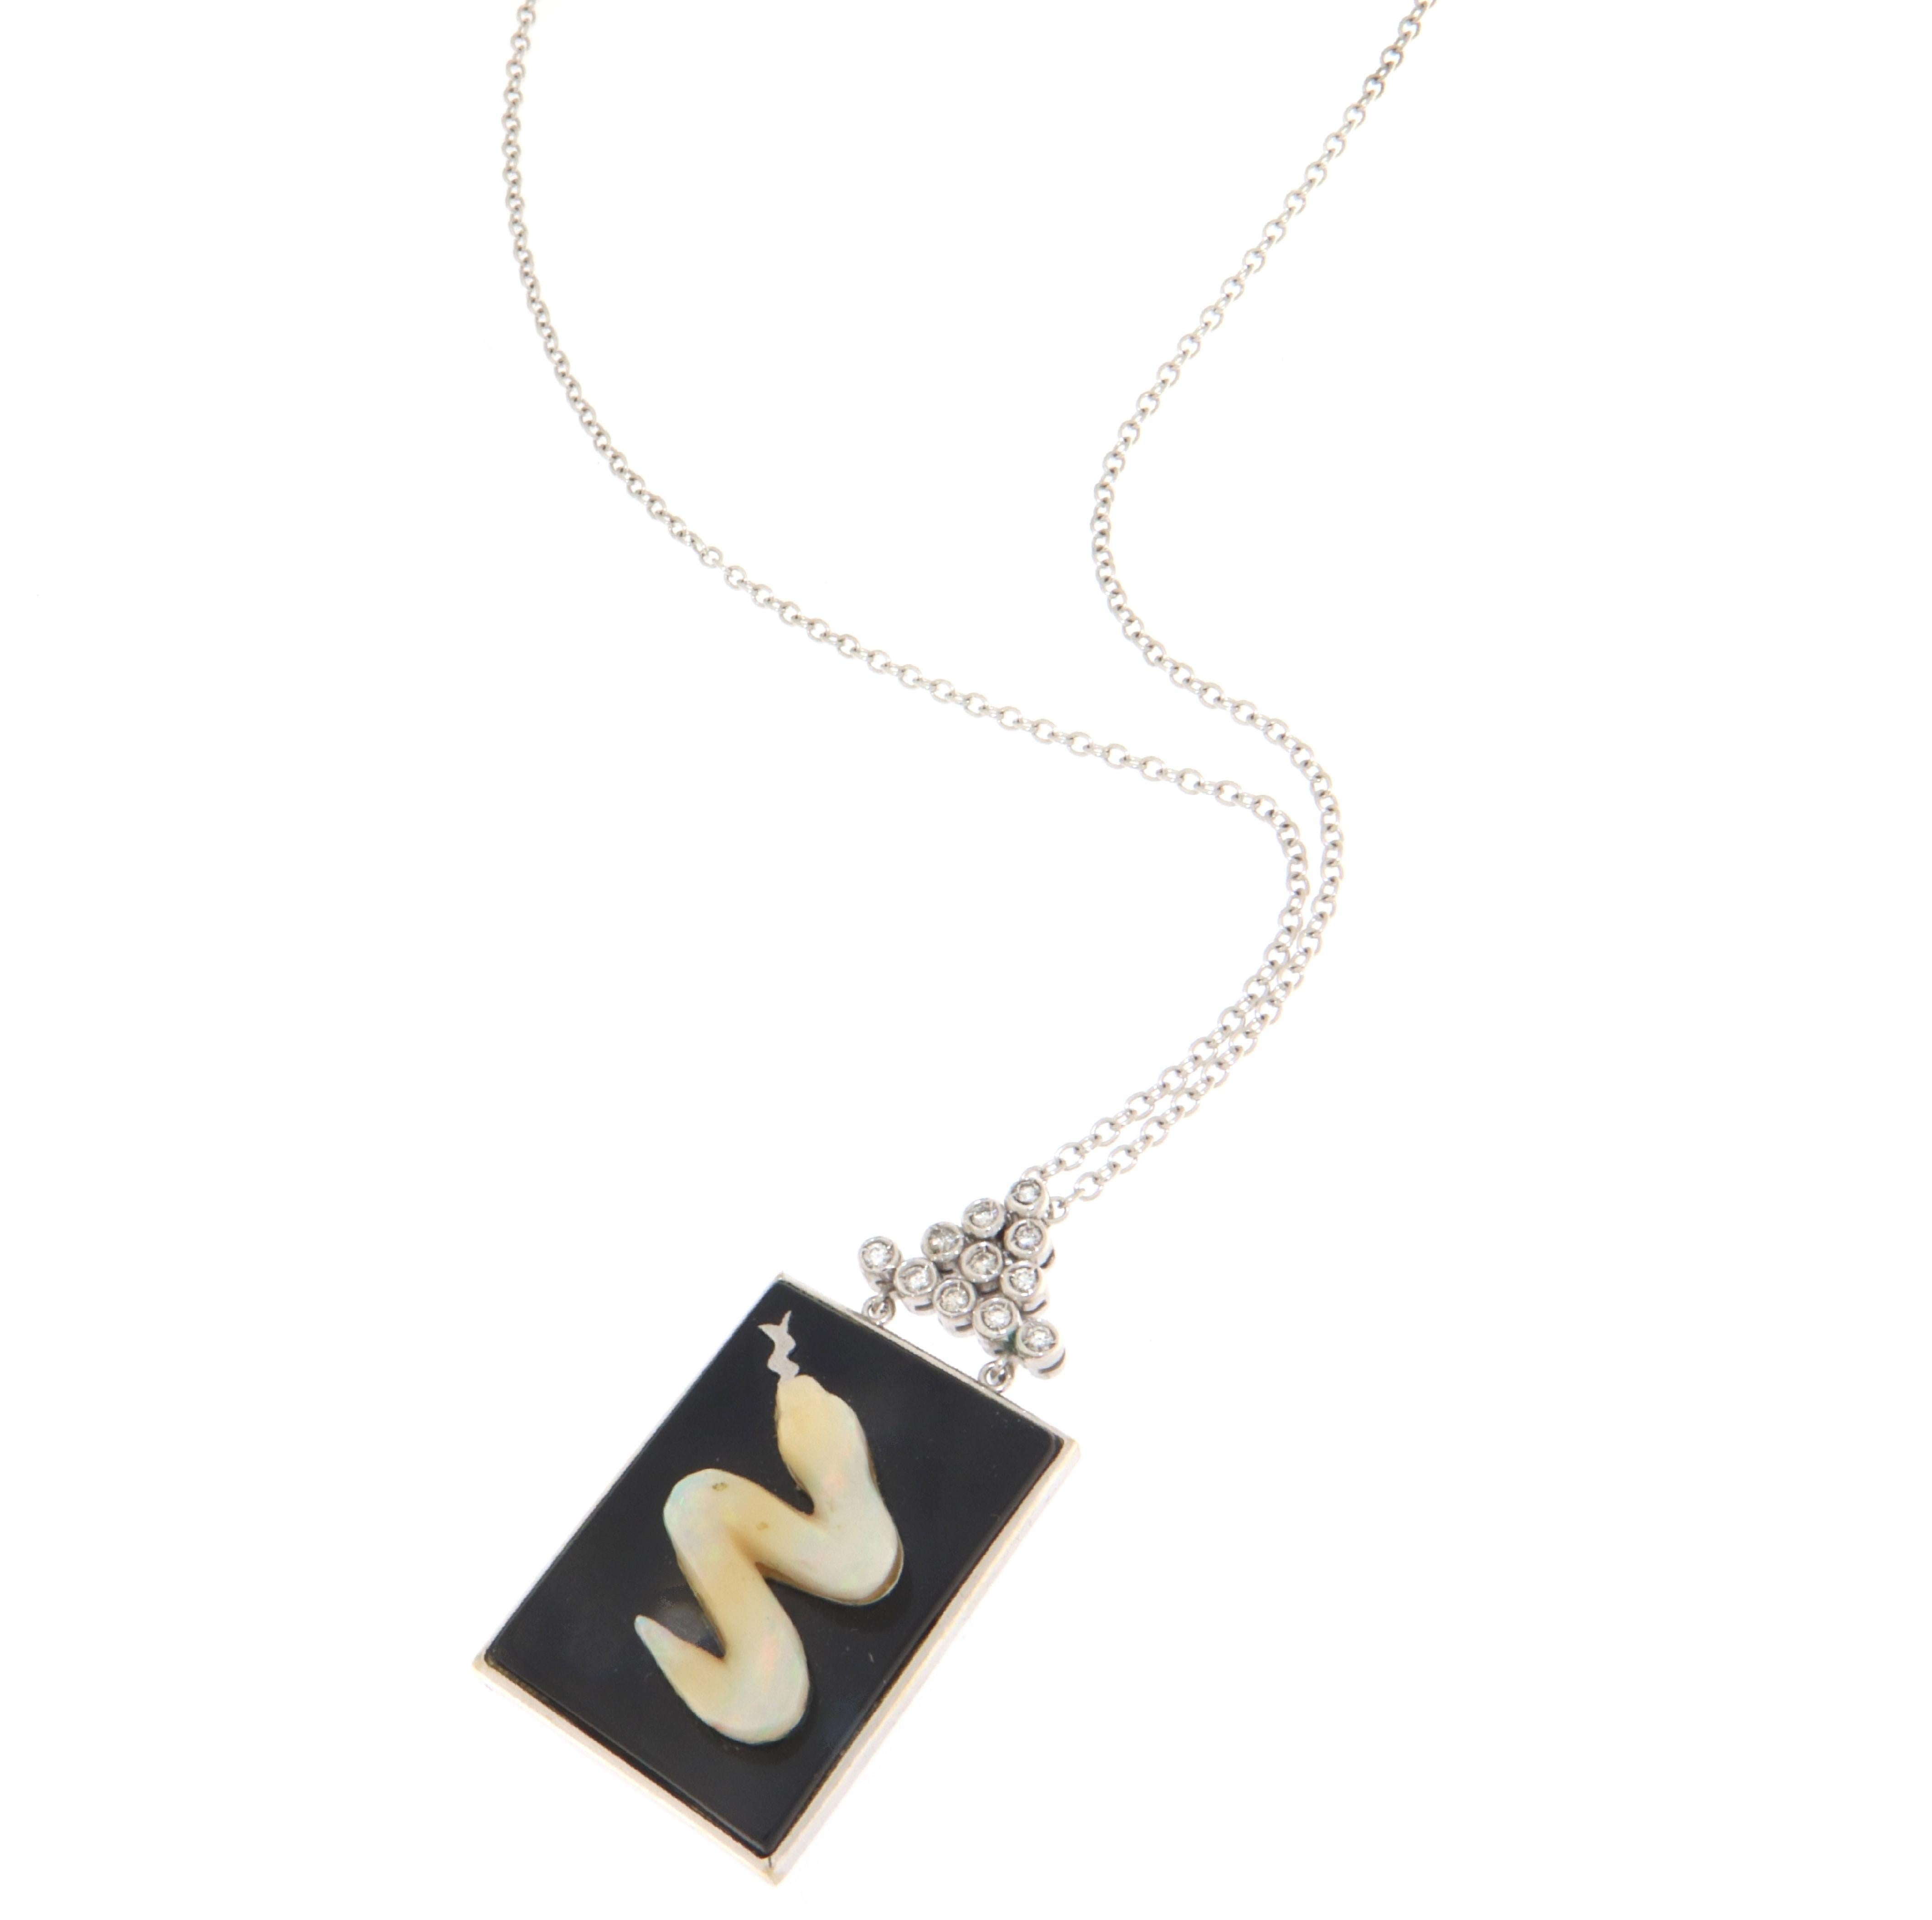 This stunning 18-karat white gold necklace features a pendant that elegantly combines timeless design with exquisite craftsmanship. The pendant boasts a sleek onyx plate that provides a dramatic backdrop for the captivating opal snake that